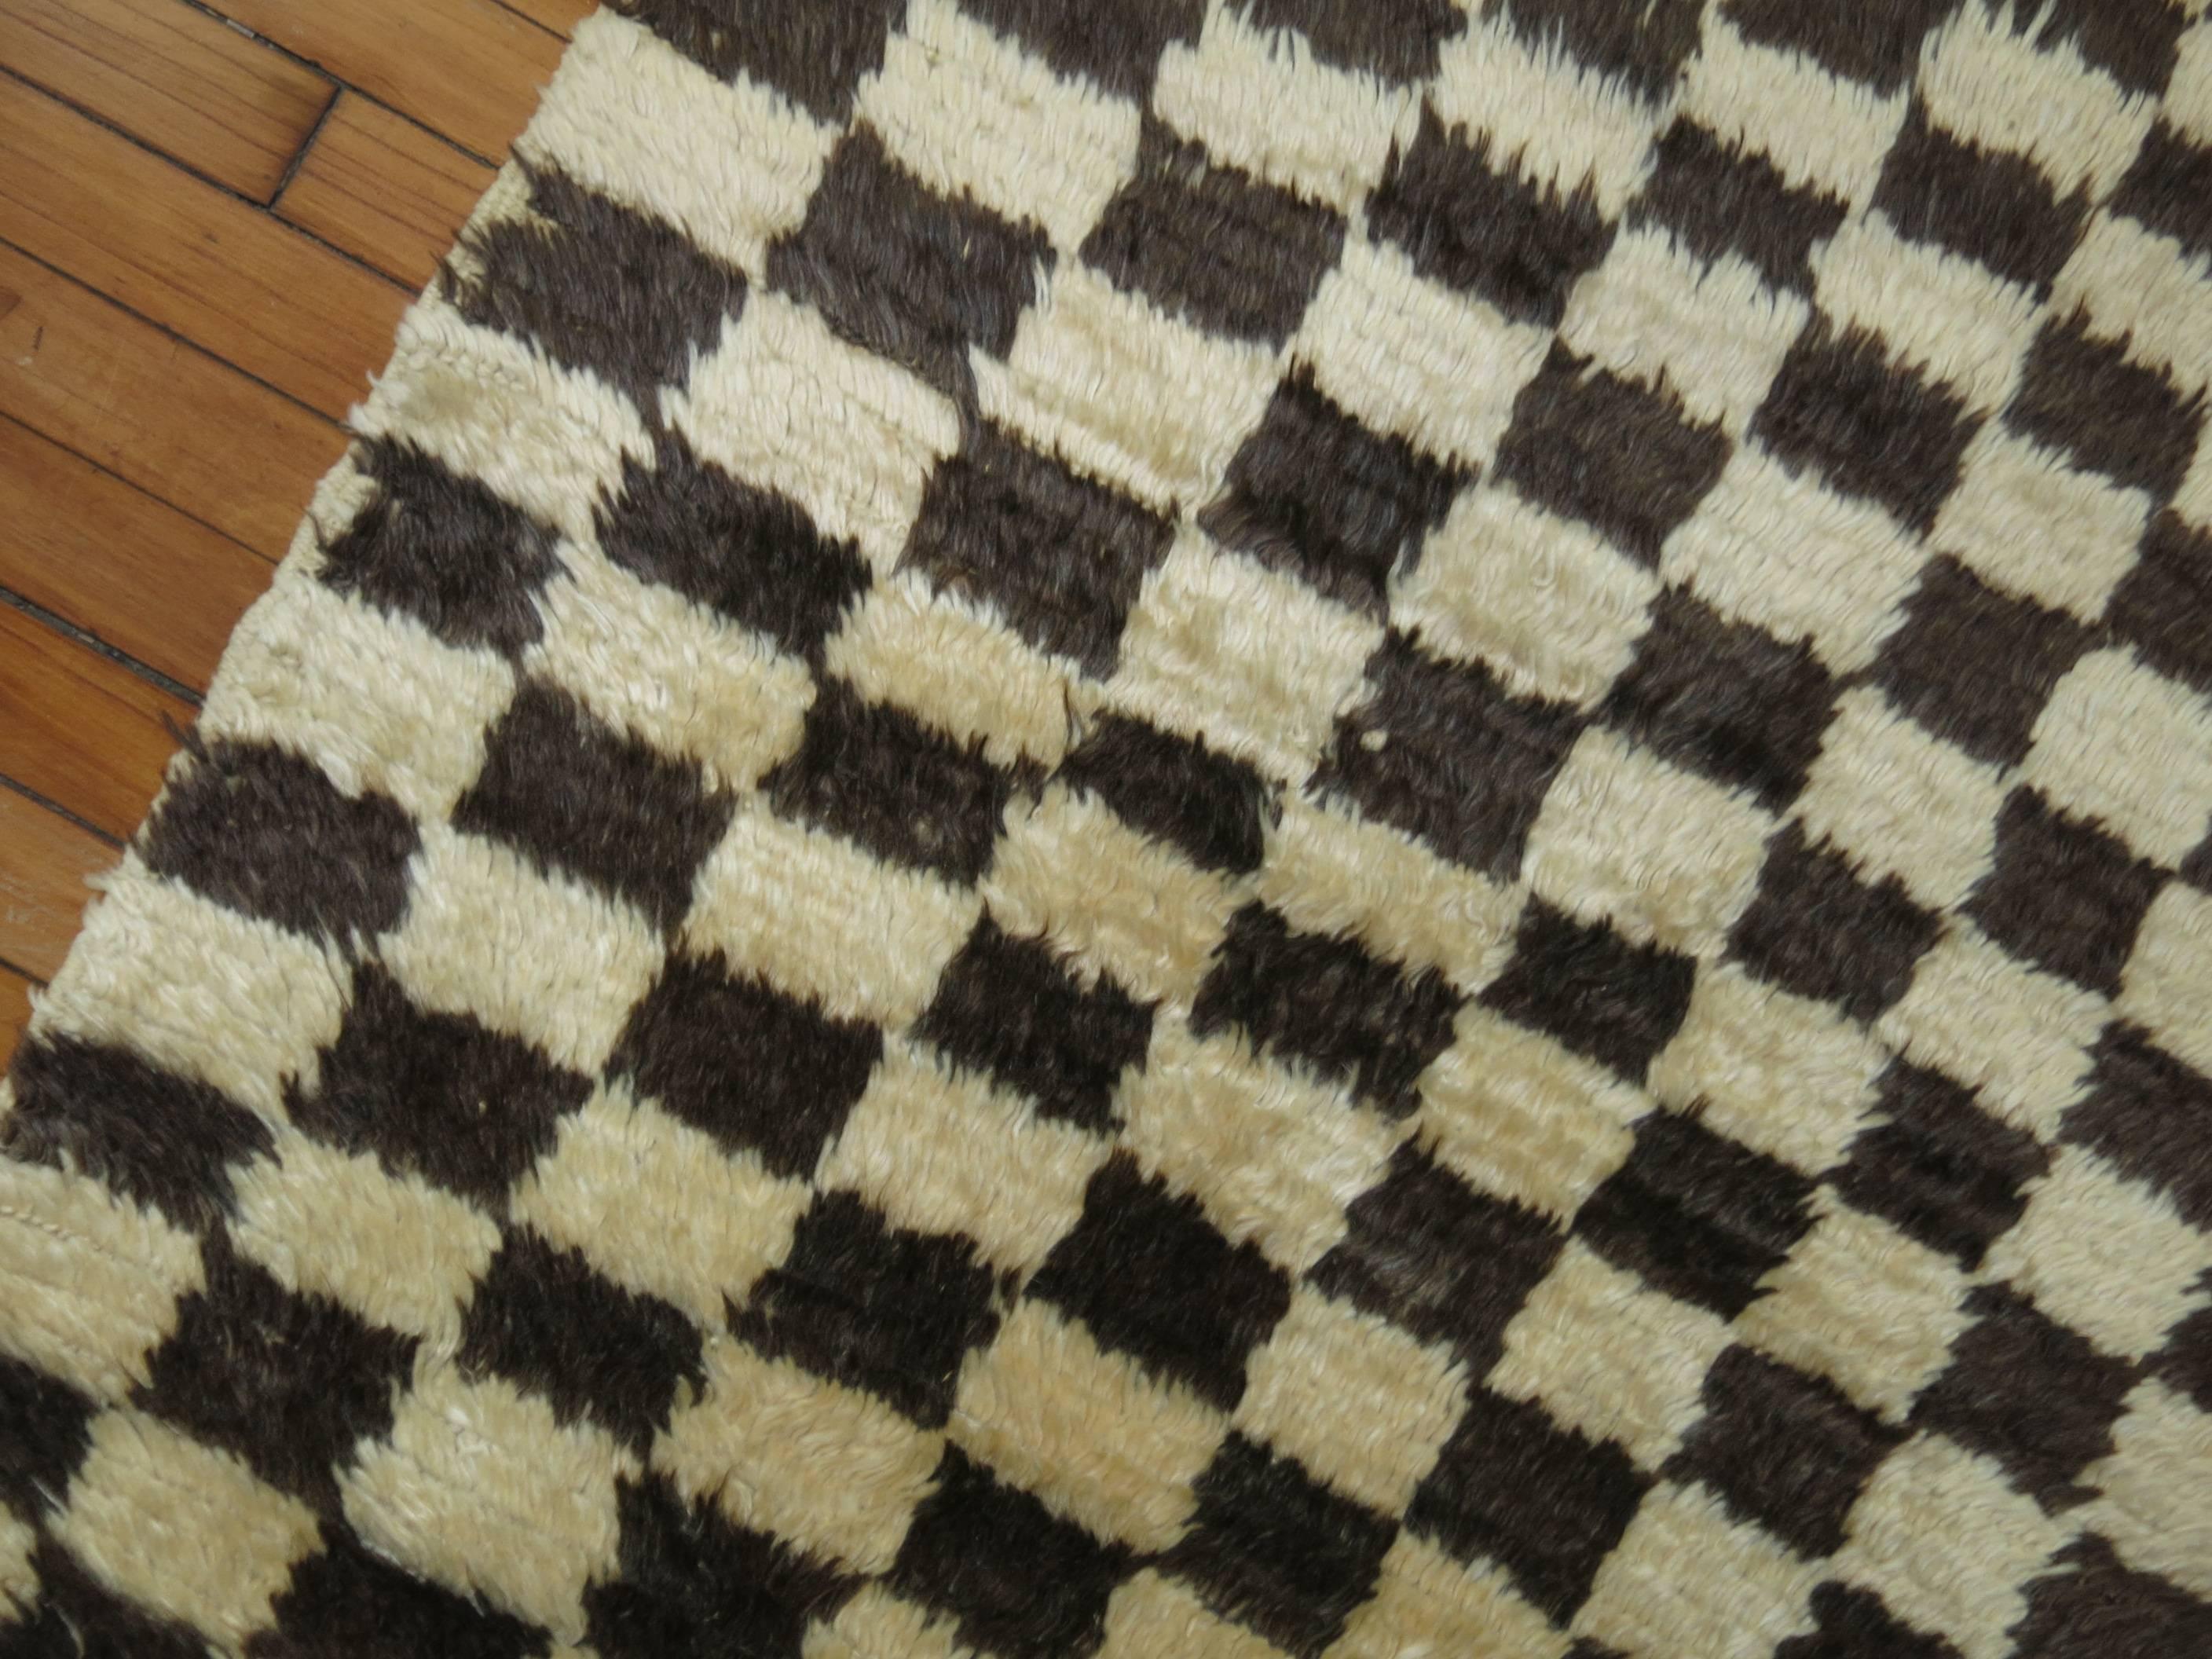 A mid-20th century turkish rug featuring a checkerboard design in brown and beige.